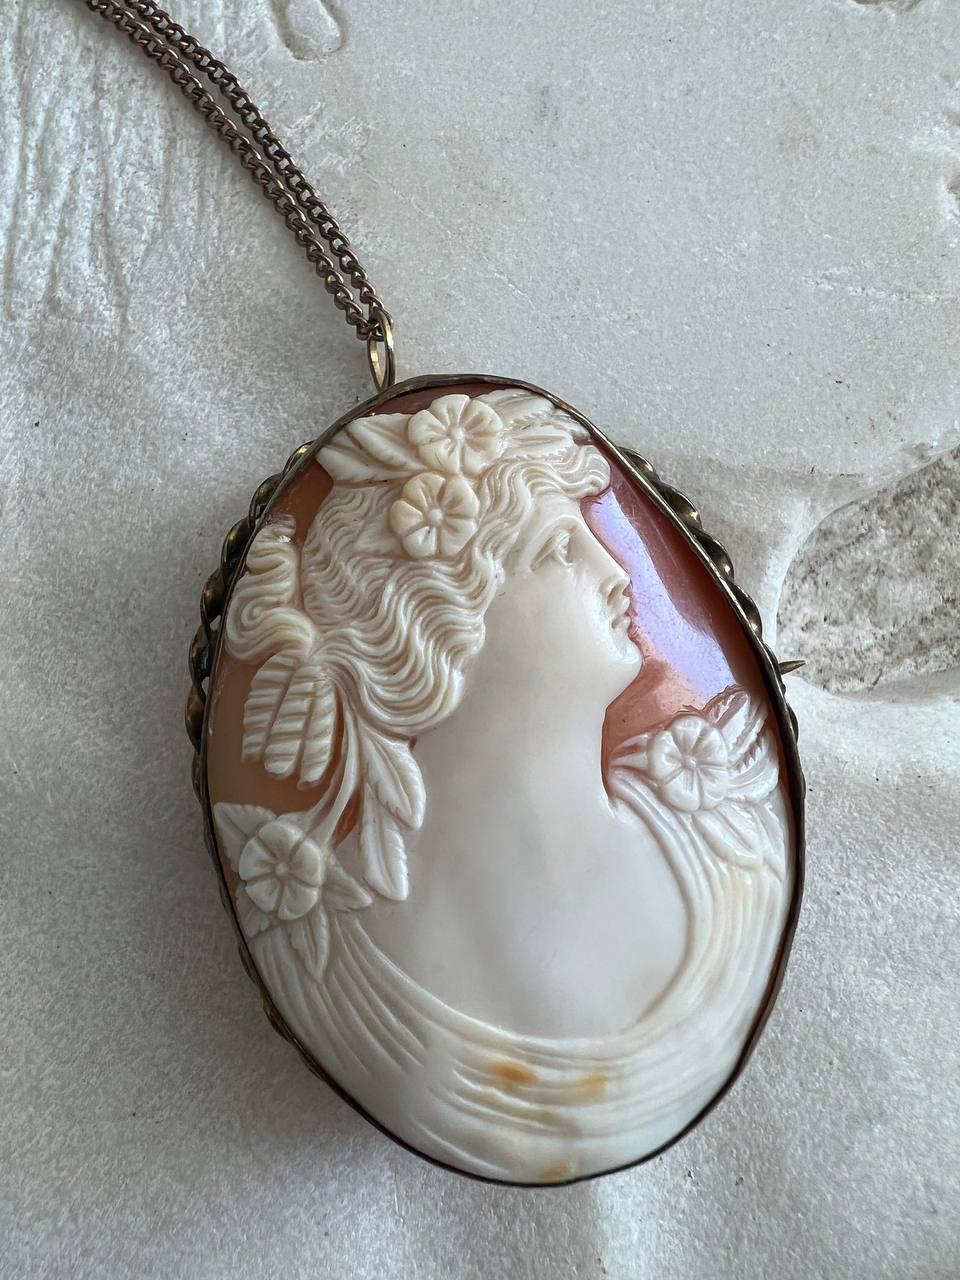 Belle Époque Antique Carved Shell Cameo 12K Gold Filled Necklace Pendant and Brooch For Sale